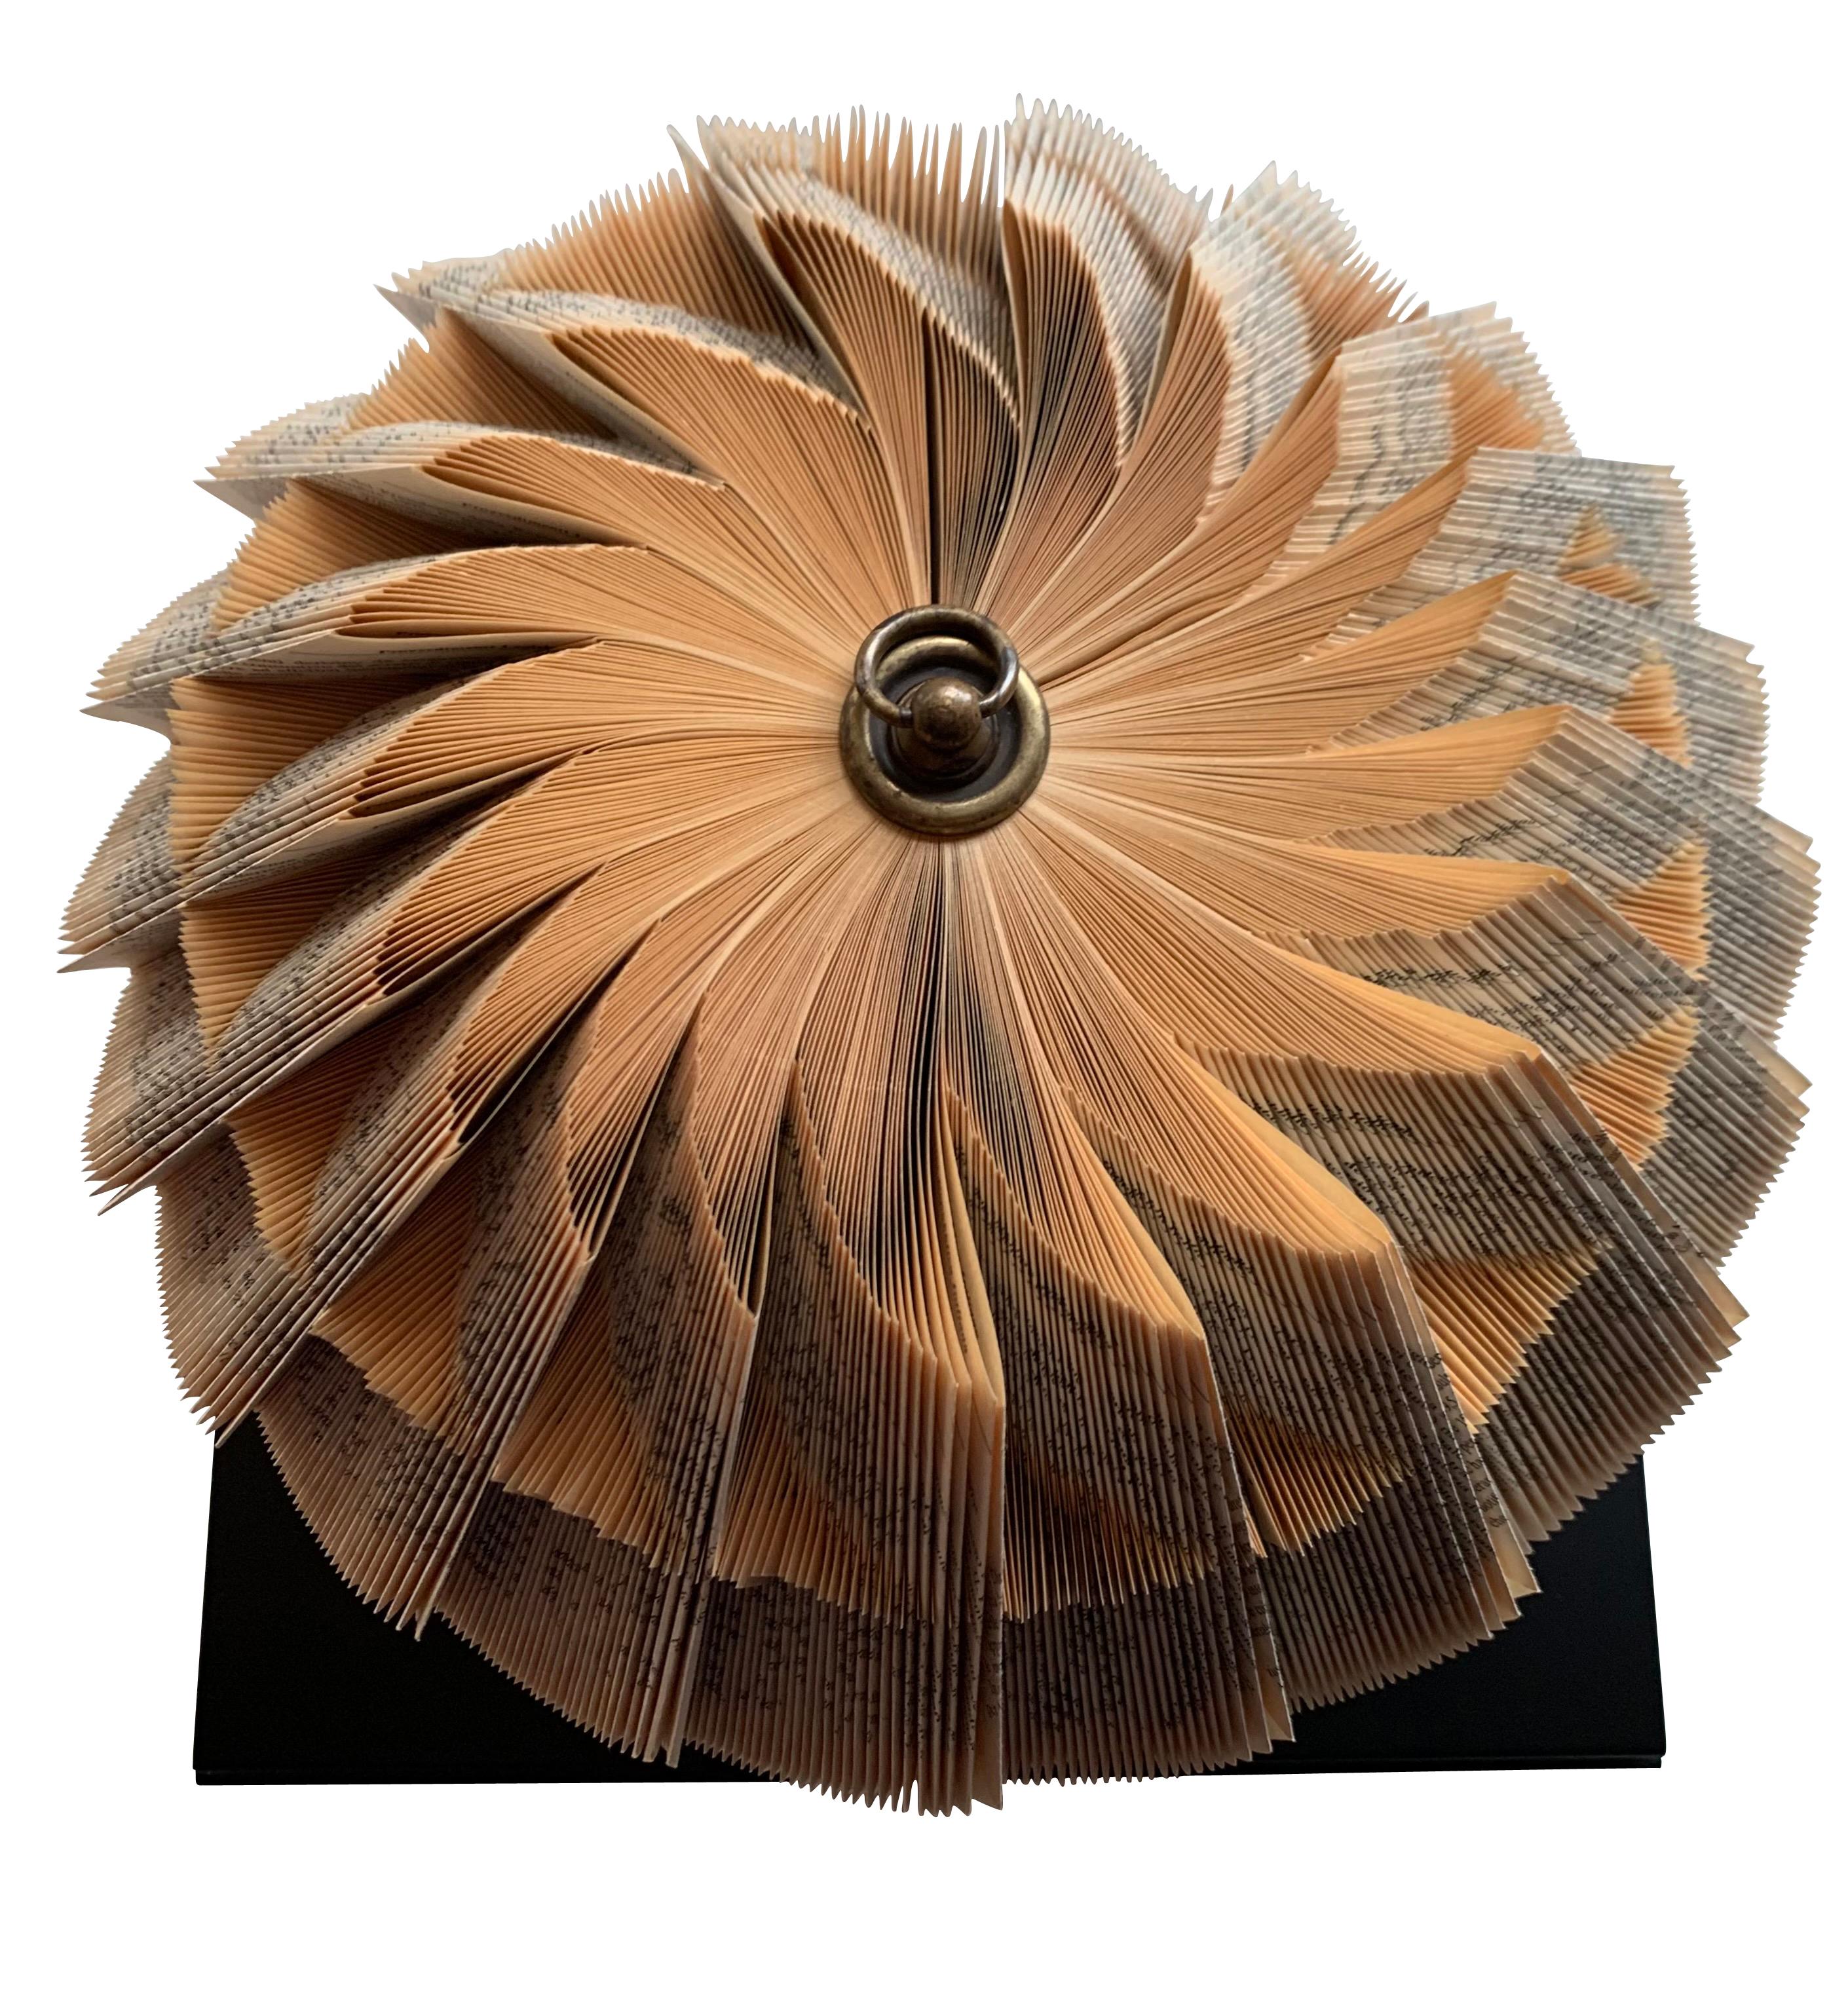 Contemporary Italian hand folded pages from vintage book to create decorative sculpture.
Circular shape.
Mounted on wood base.
Plexi box surround.